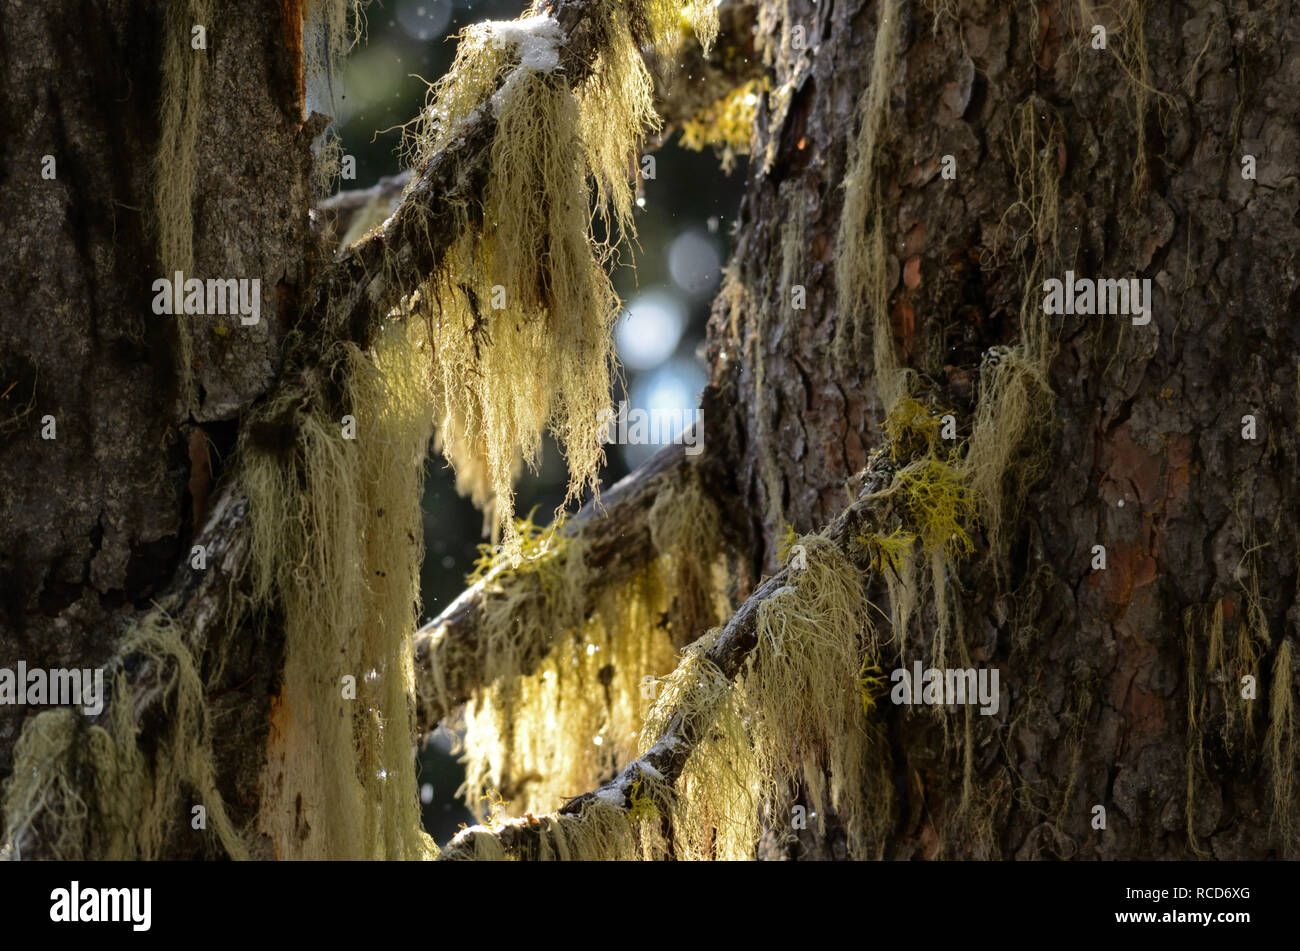 Witch's hair lichen on Engelmann spruce in the Buckhorn Ridge Roadless Area in fall. Purcell Mountains, Montana. (Photo by Randy Beacham) Stock Photo